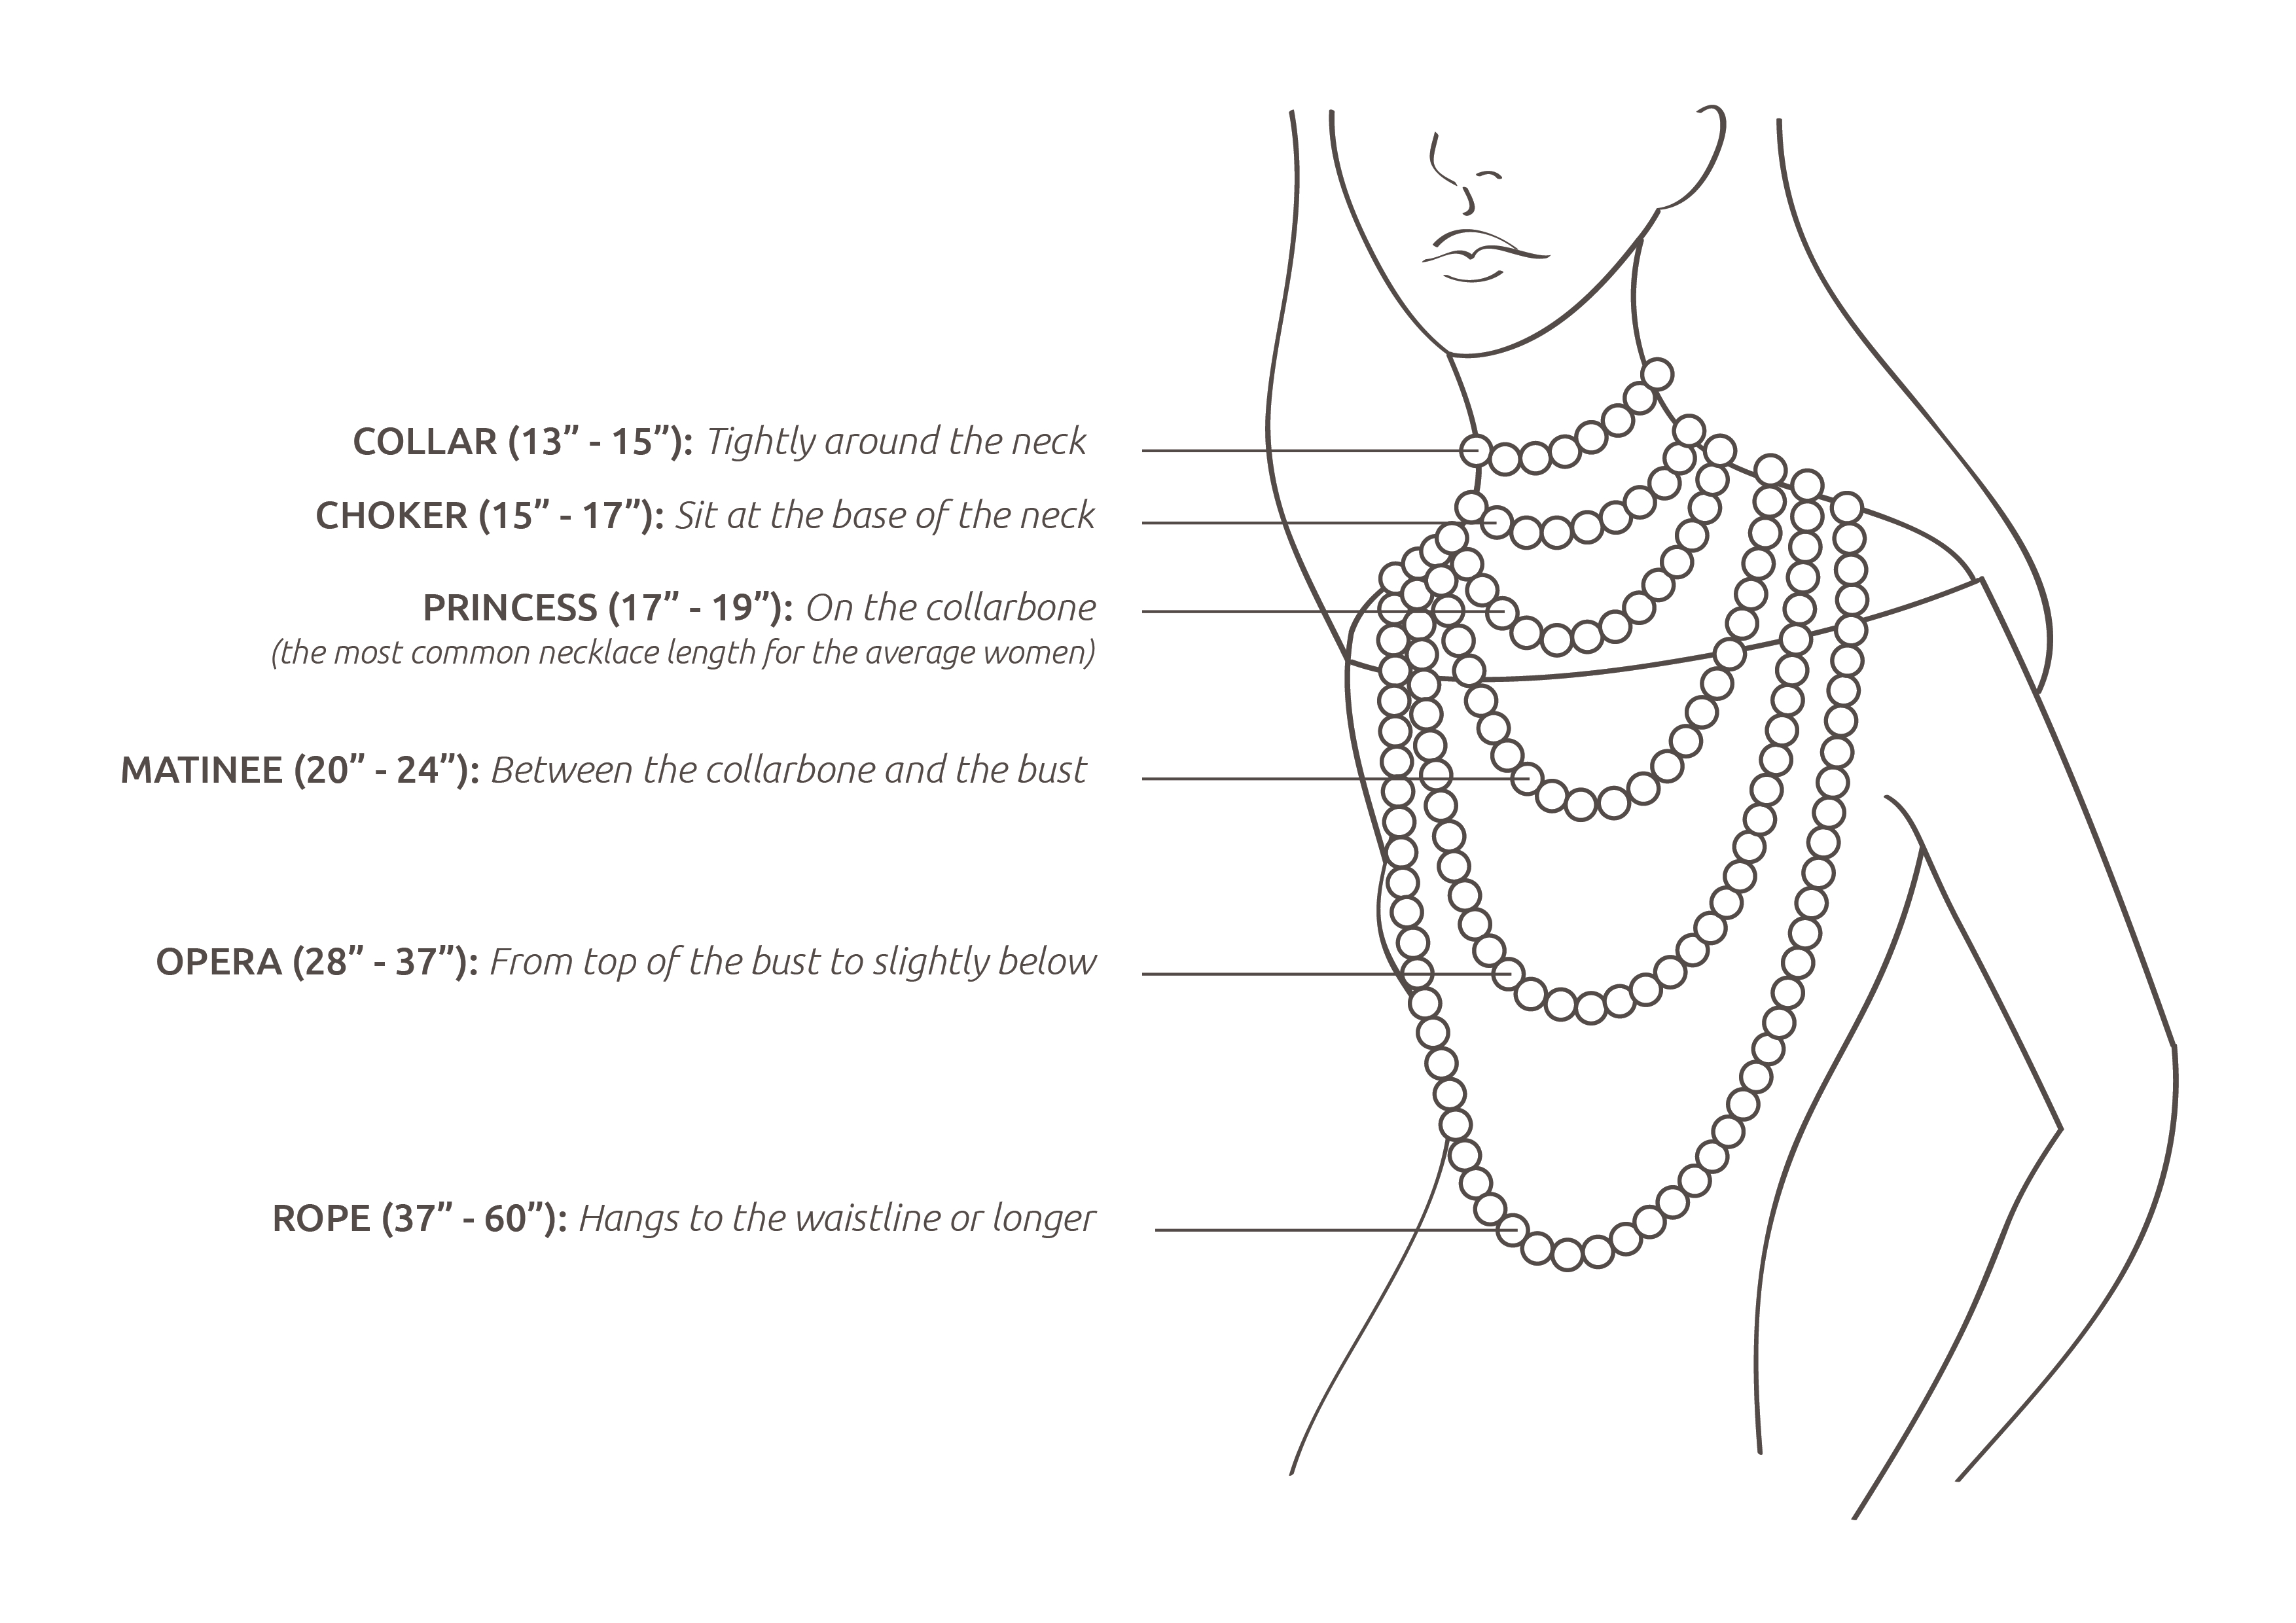 Necklace Length Diagram Necklace Length Guide How To Measure Choose The Right Necklace